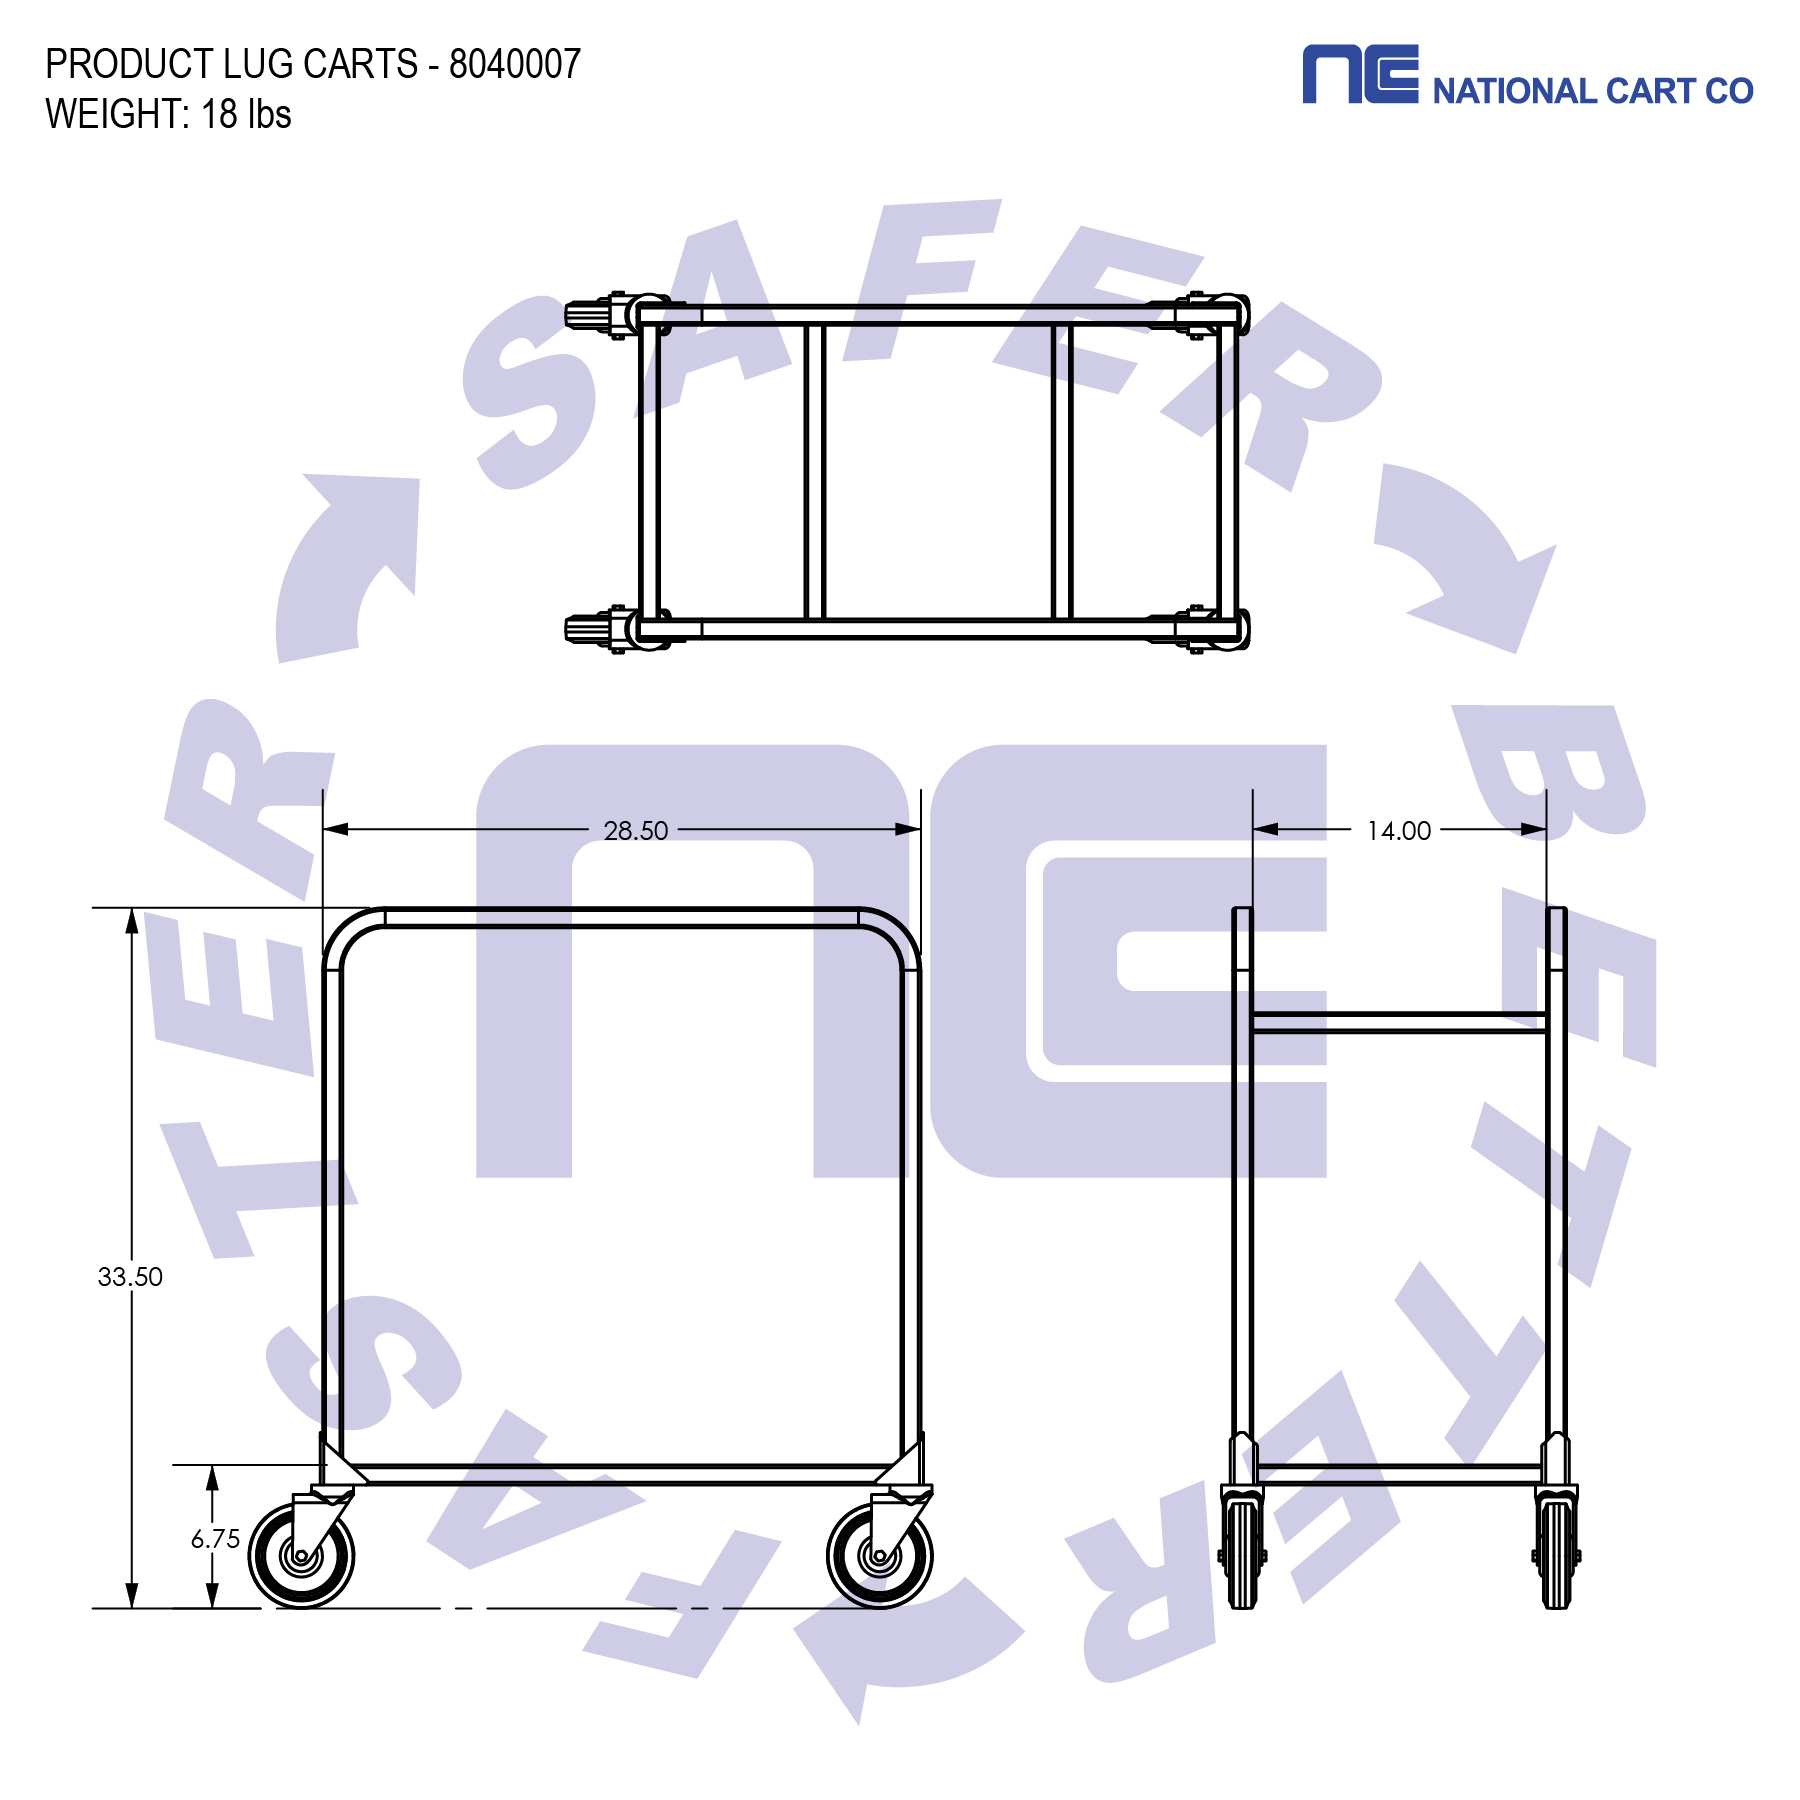 Built to last. All-welded aluminum, heavy-duty cart. Gusseted legs for added strength. NSF approved. This food service cart meets strict standards and procedures imposed by NSF.